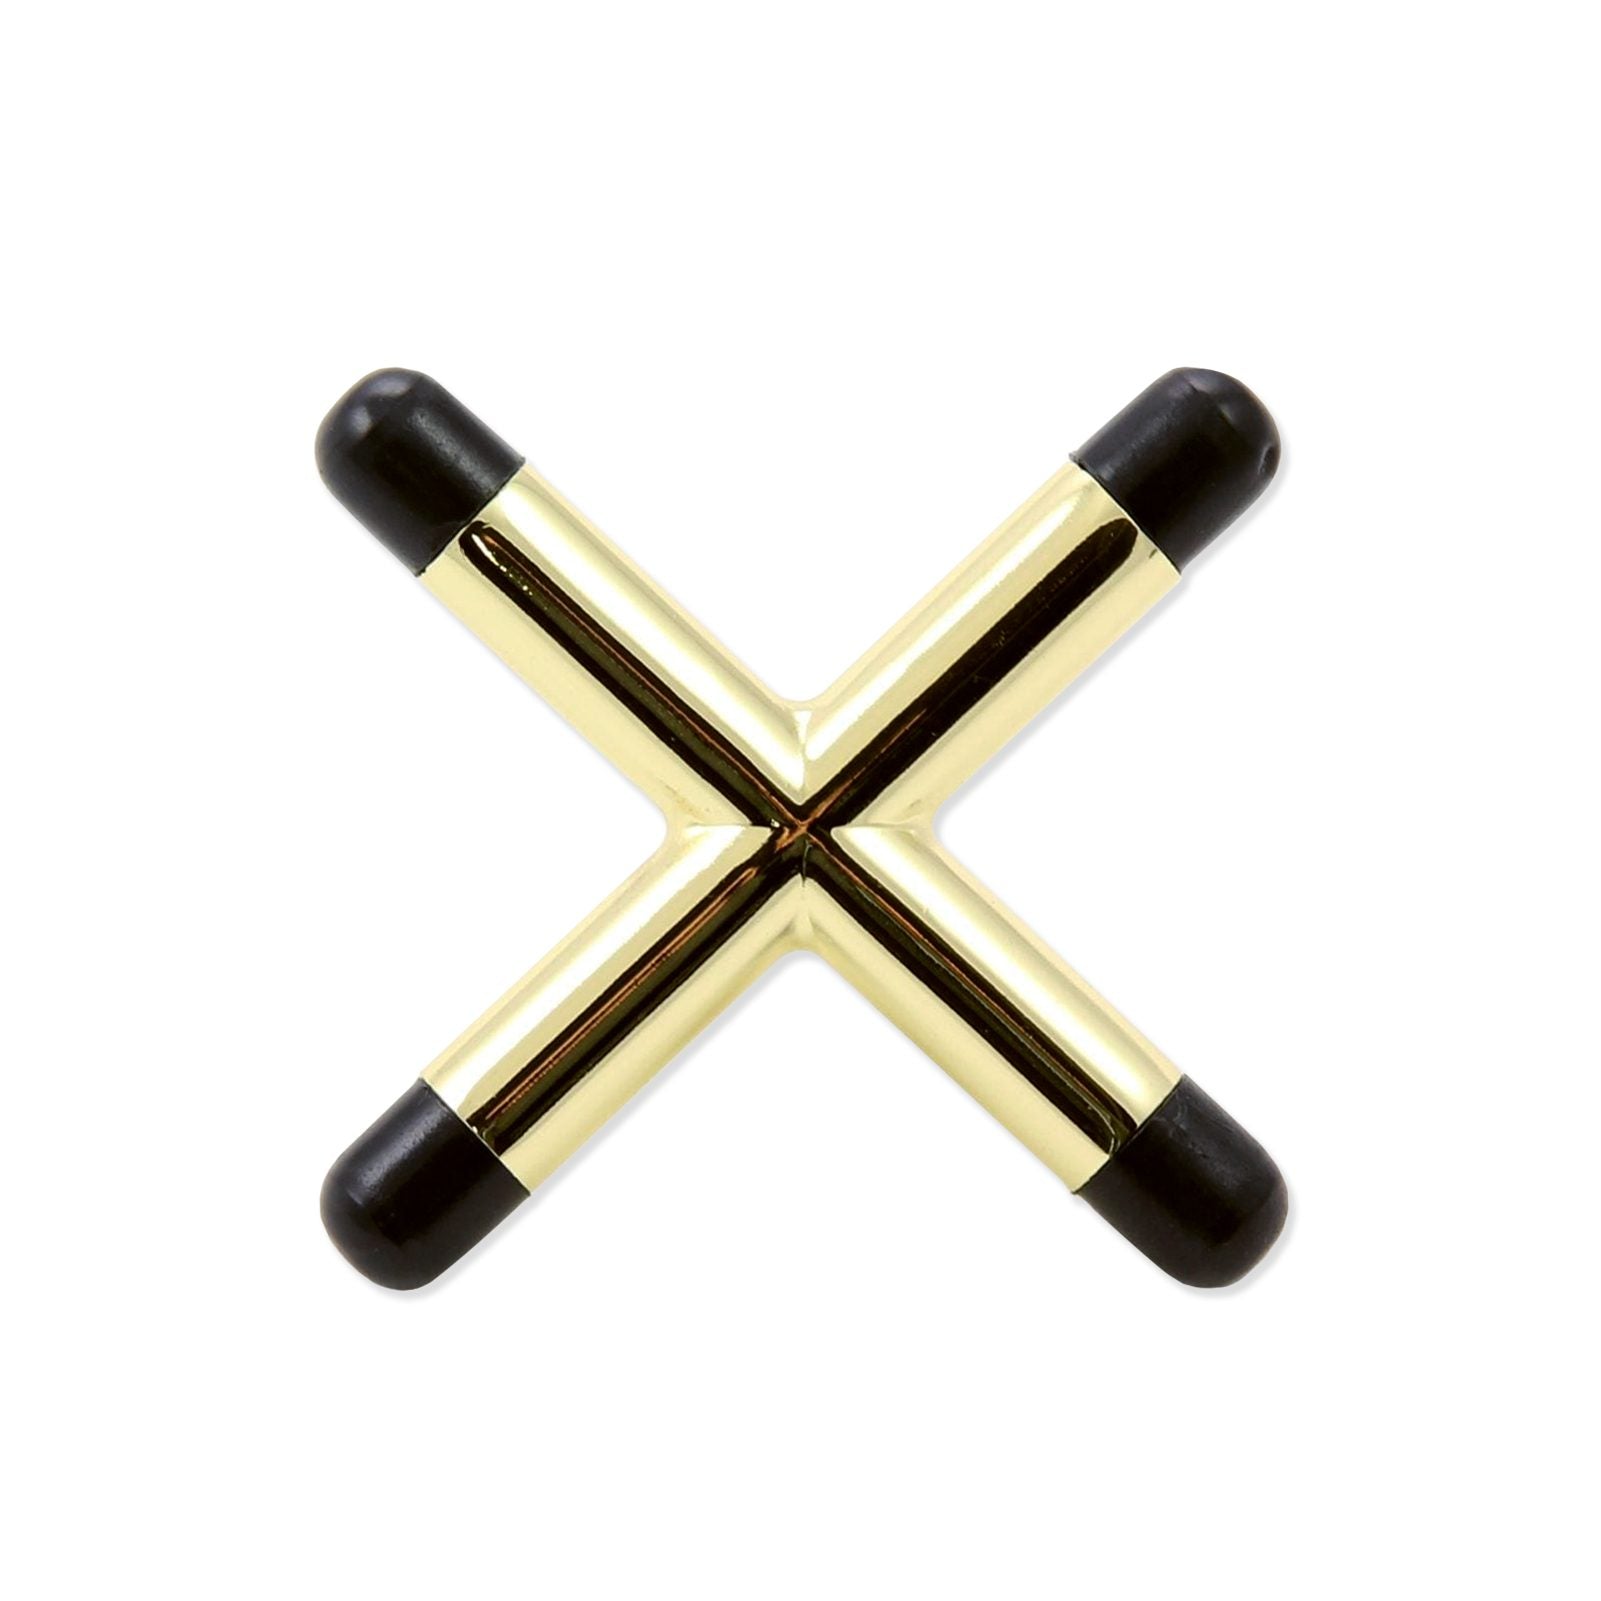 Brass CROSS Rest Head for Snooker or Pool with Plastic Toes